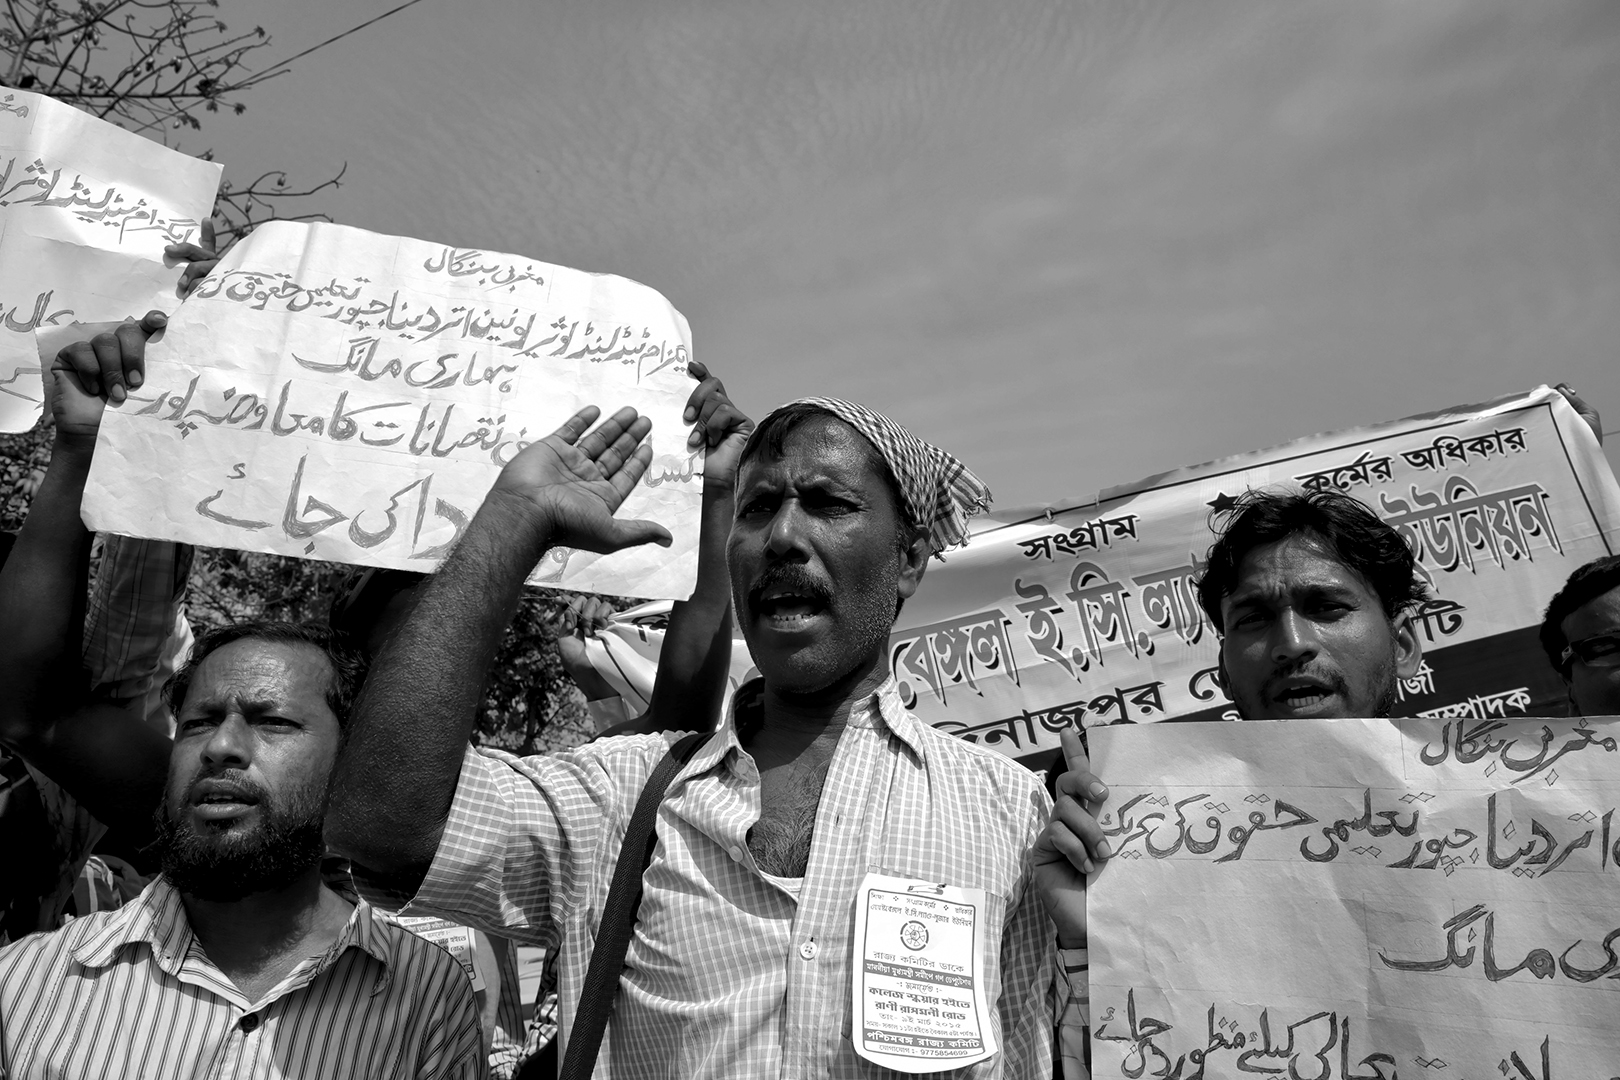  Demonstration in the City of New Delhi. India 